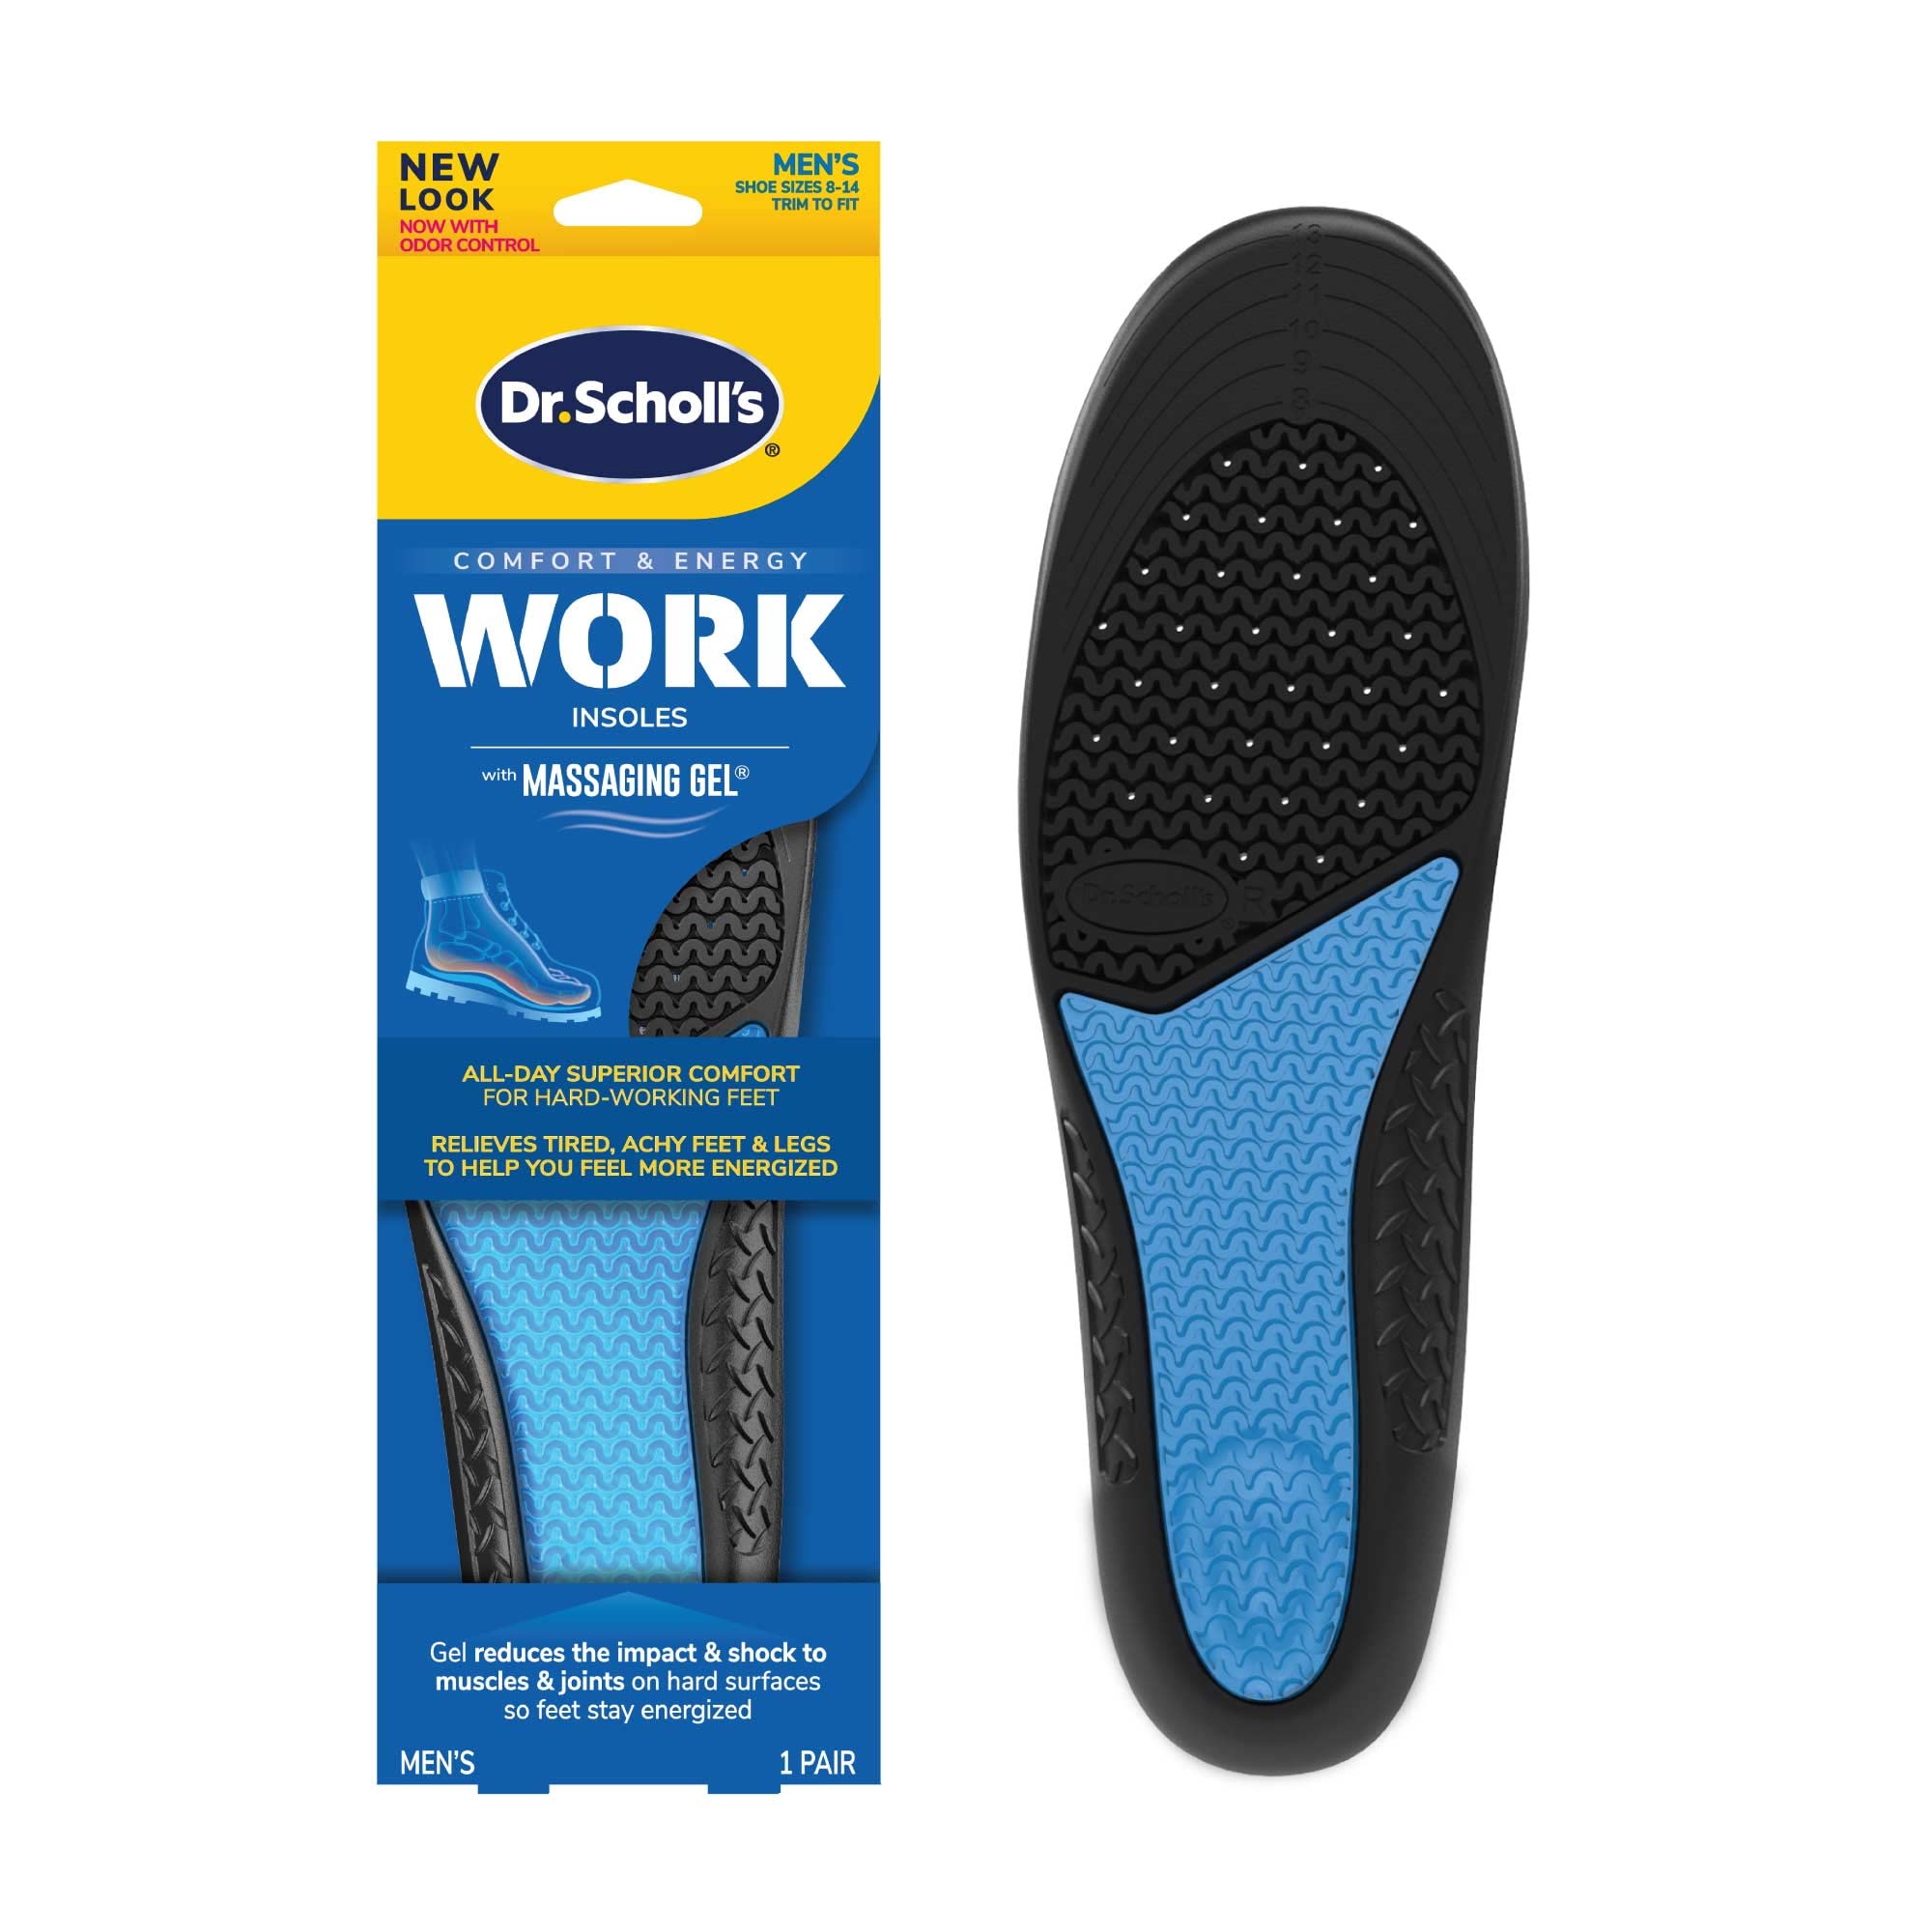 Dr. Scholl's Work All-Day Superior Comfort Insoles with Massaging Gel®, On Feet All-day,Shock Absorbing, Arch Support, Odor Control,Trim Inserts to Fit Work Boots and Shoes, Women's Size 6-10, 1 Pair